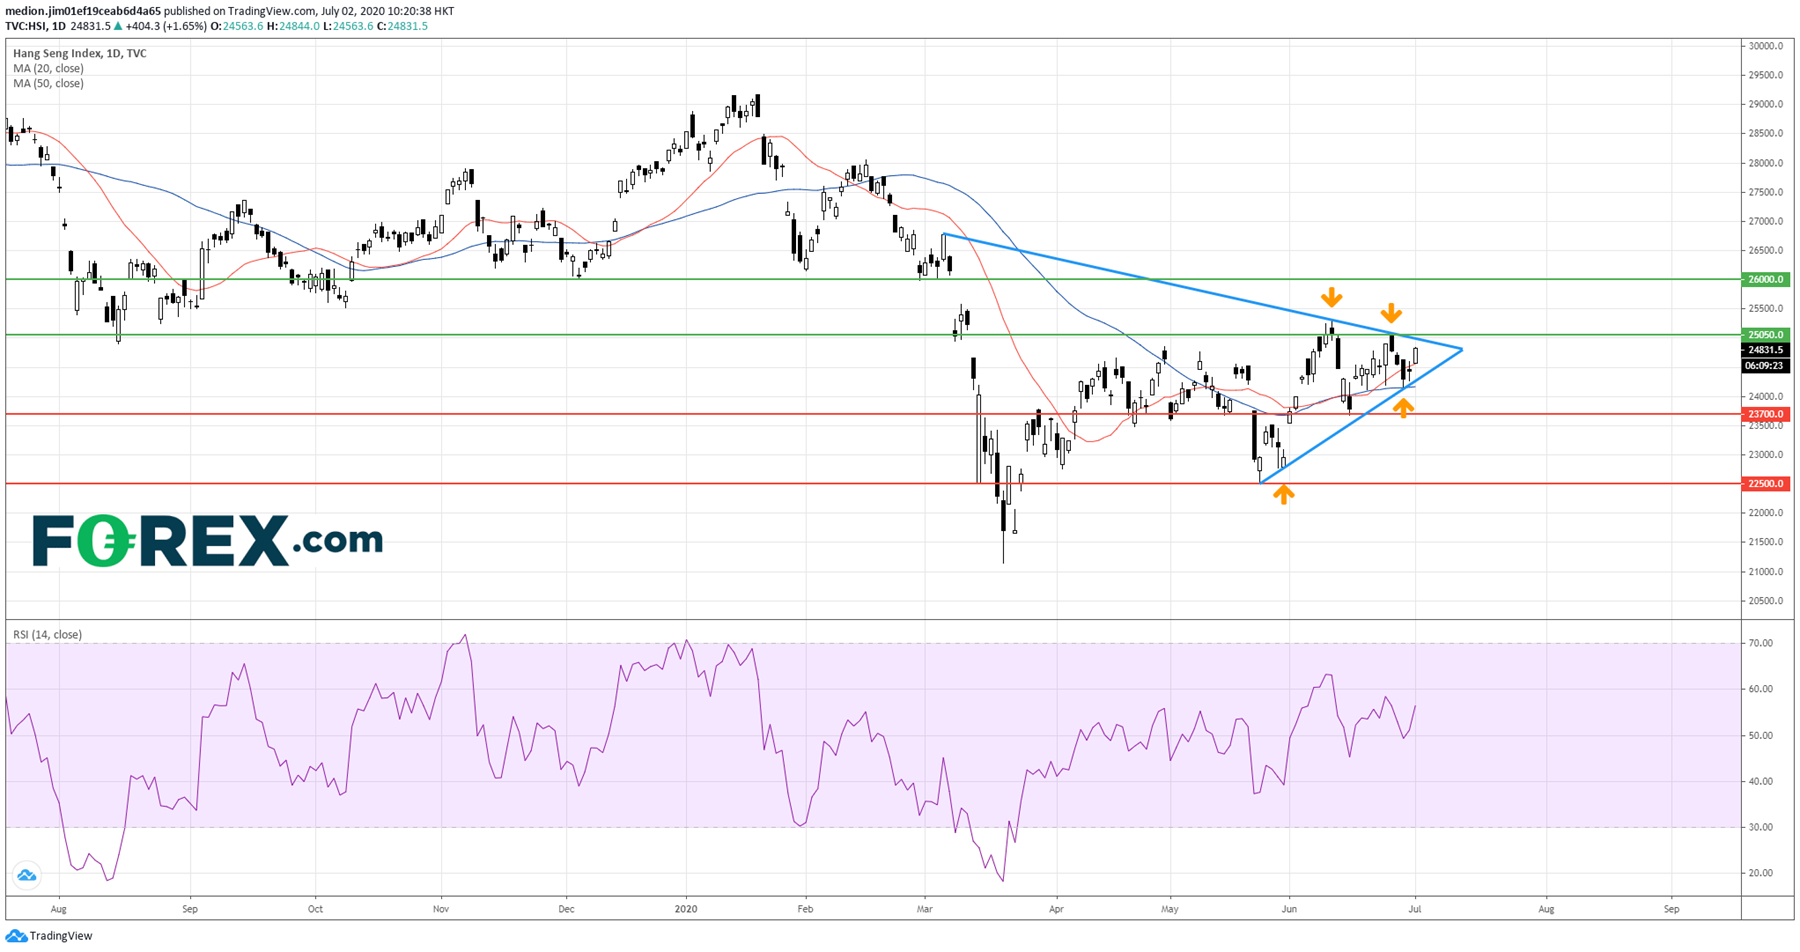 Chart showing Hang Seng Index. Analysed in July 2020